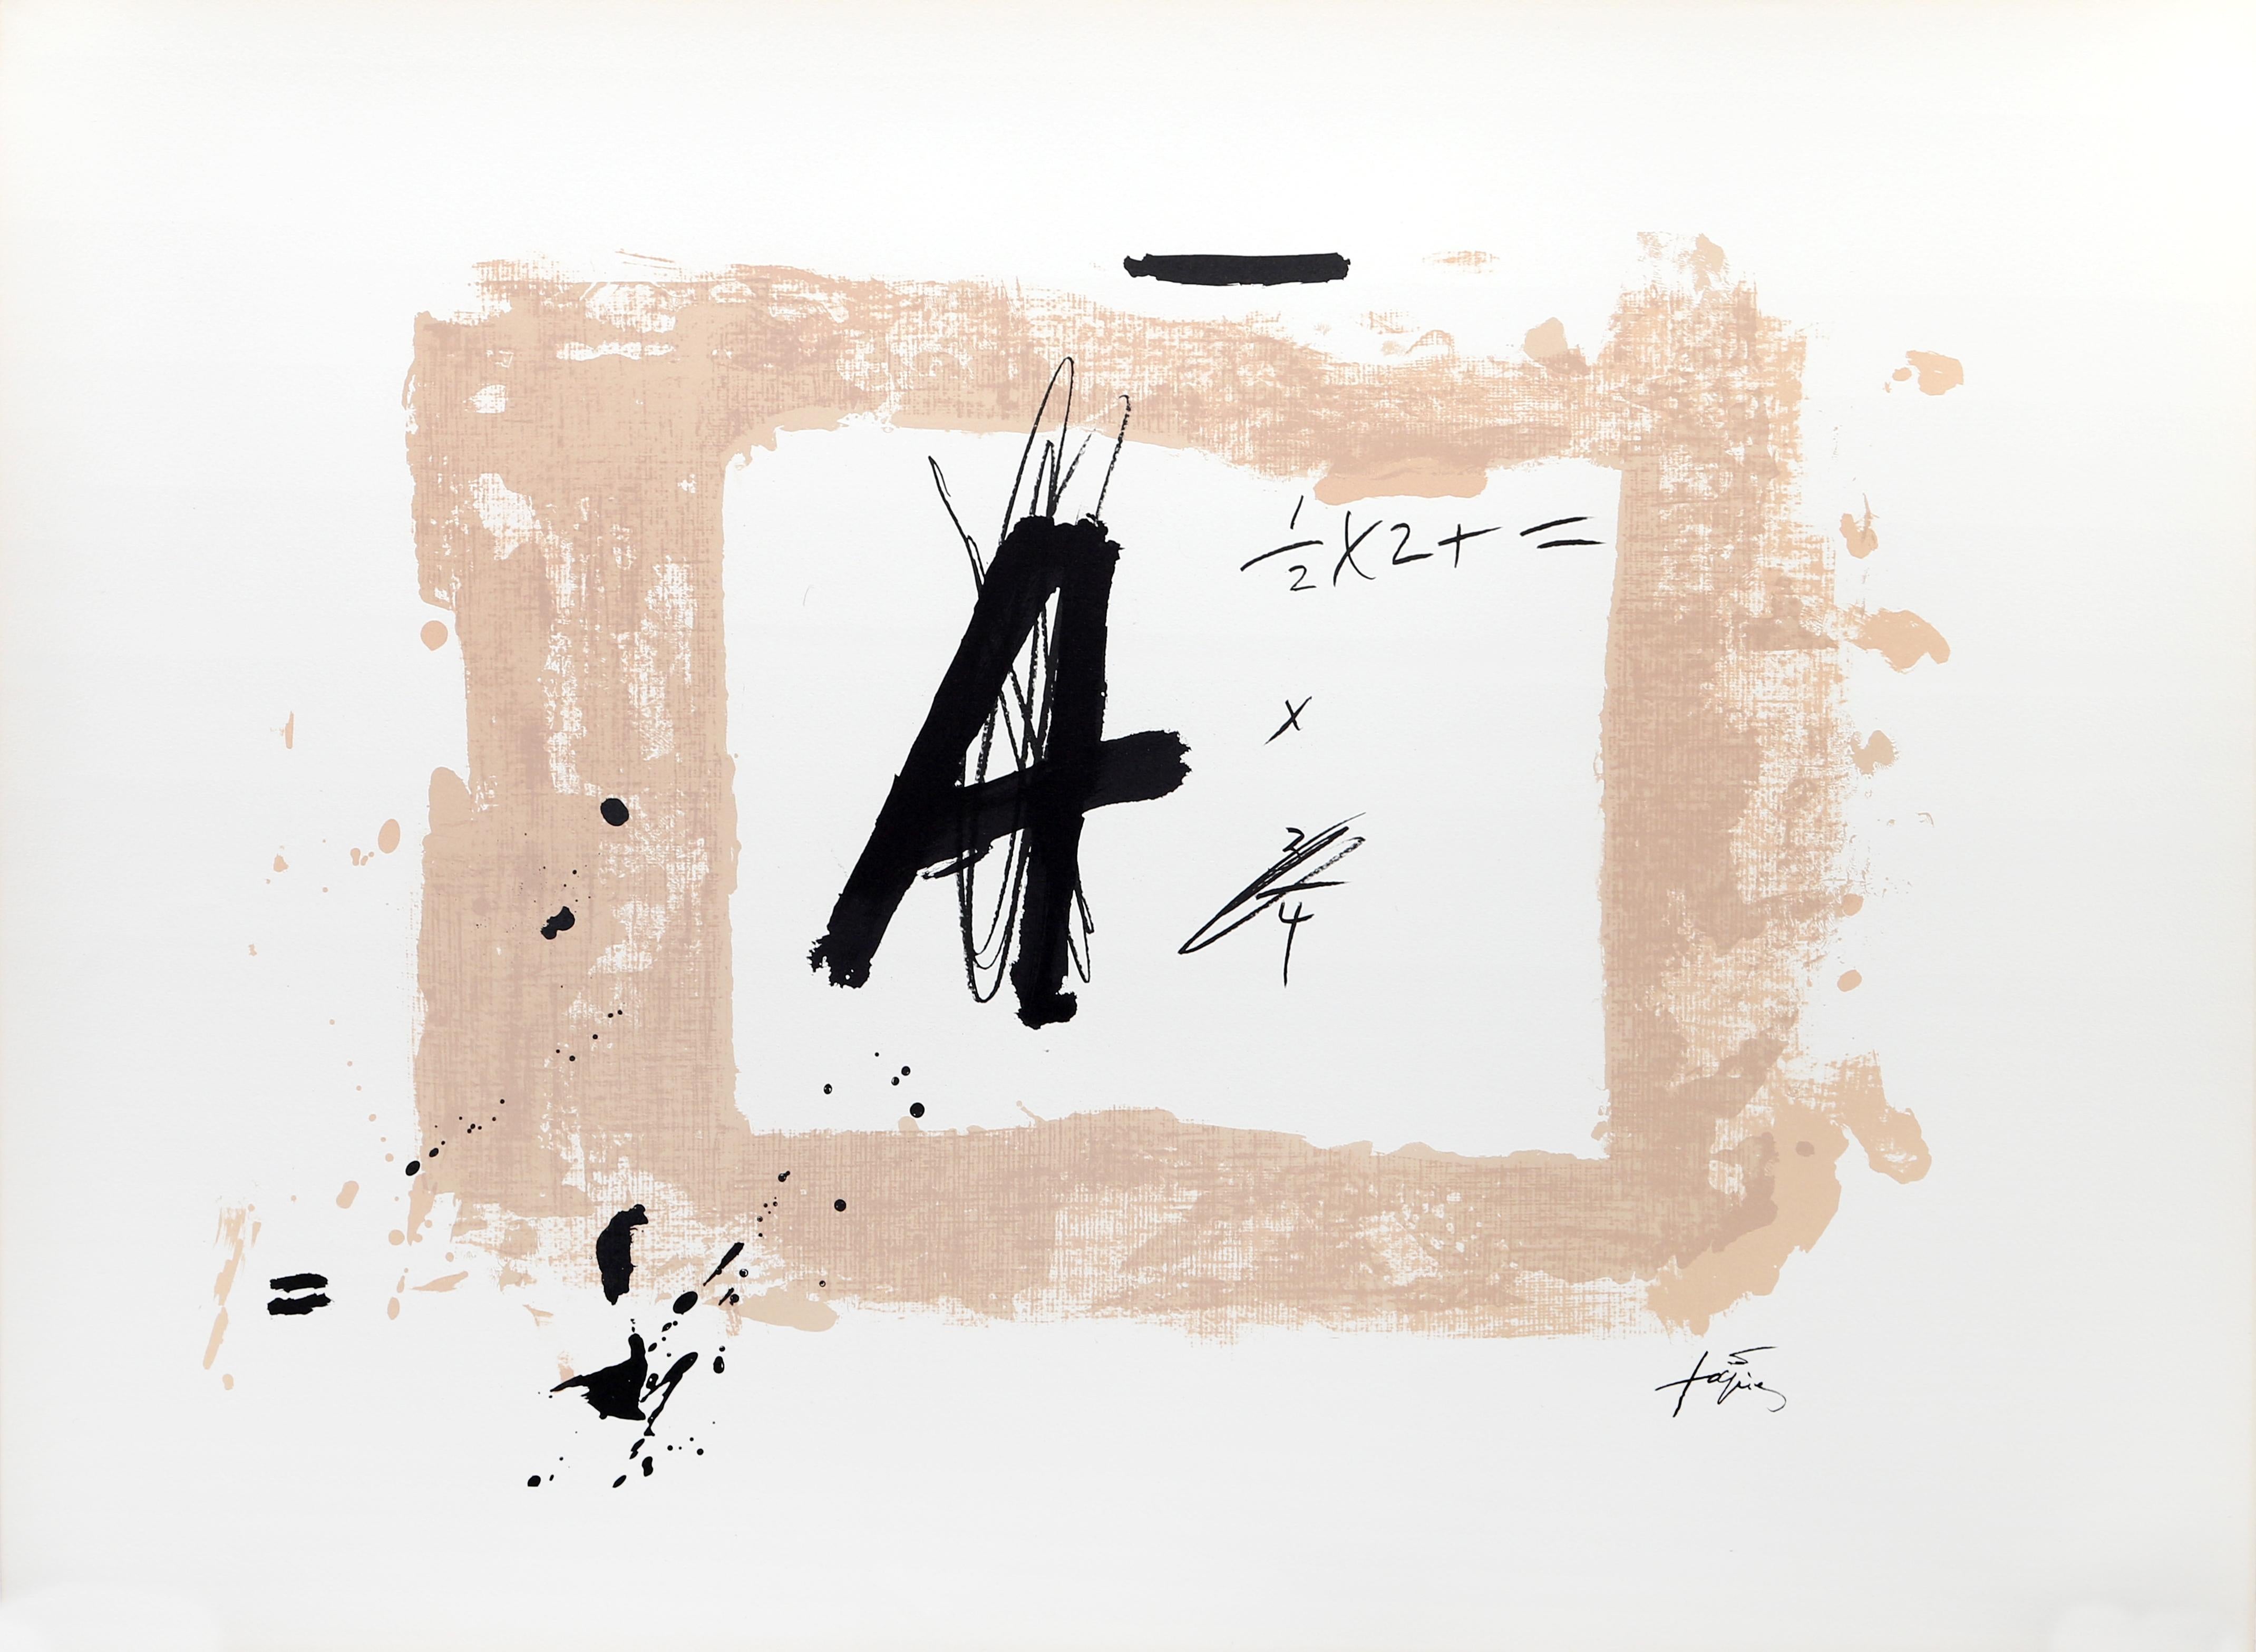 Antoni Tàpies Abstract Print - The Letter "A", by Antoni Tapies